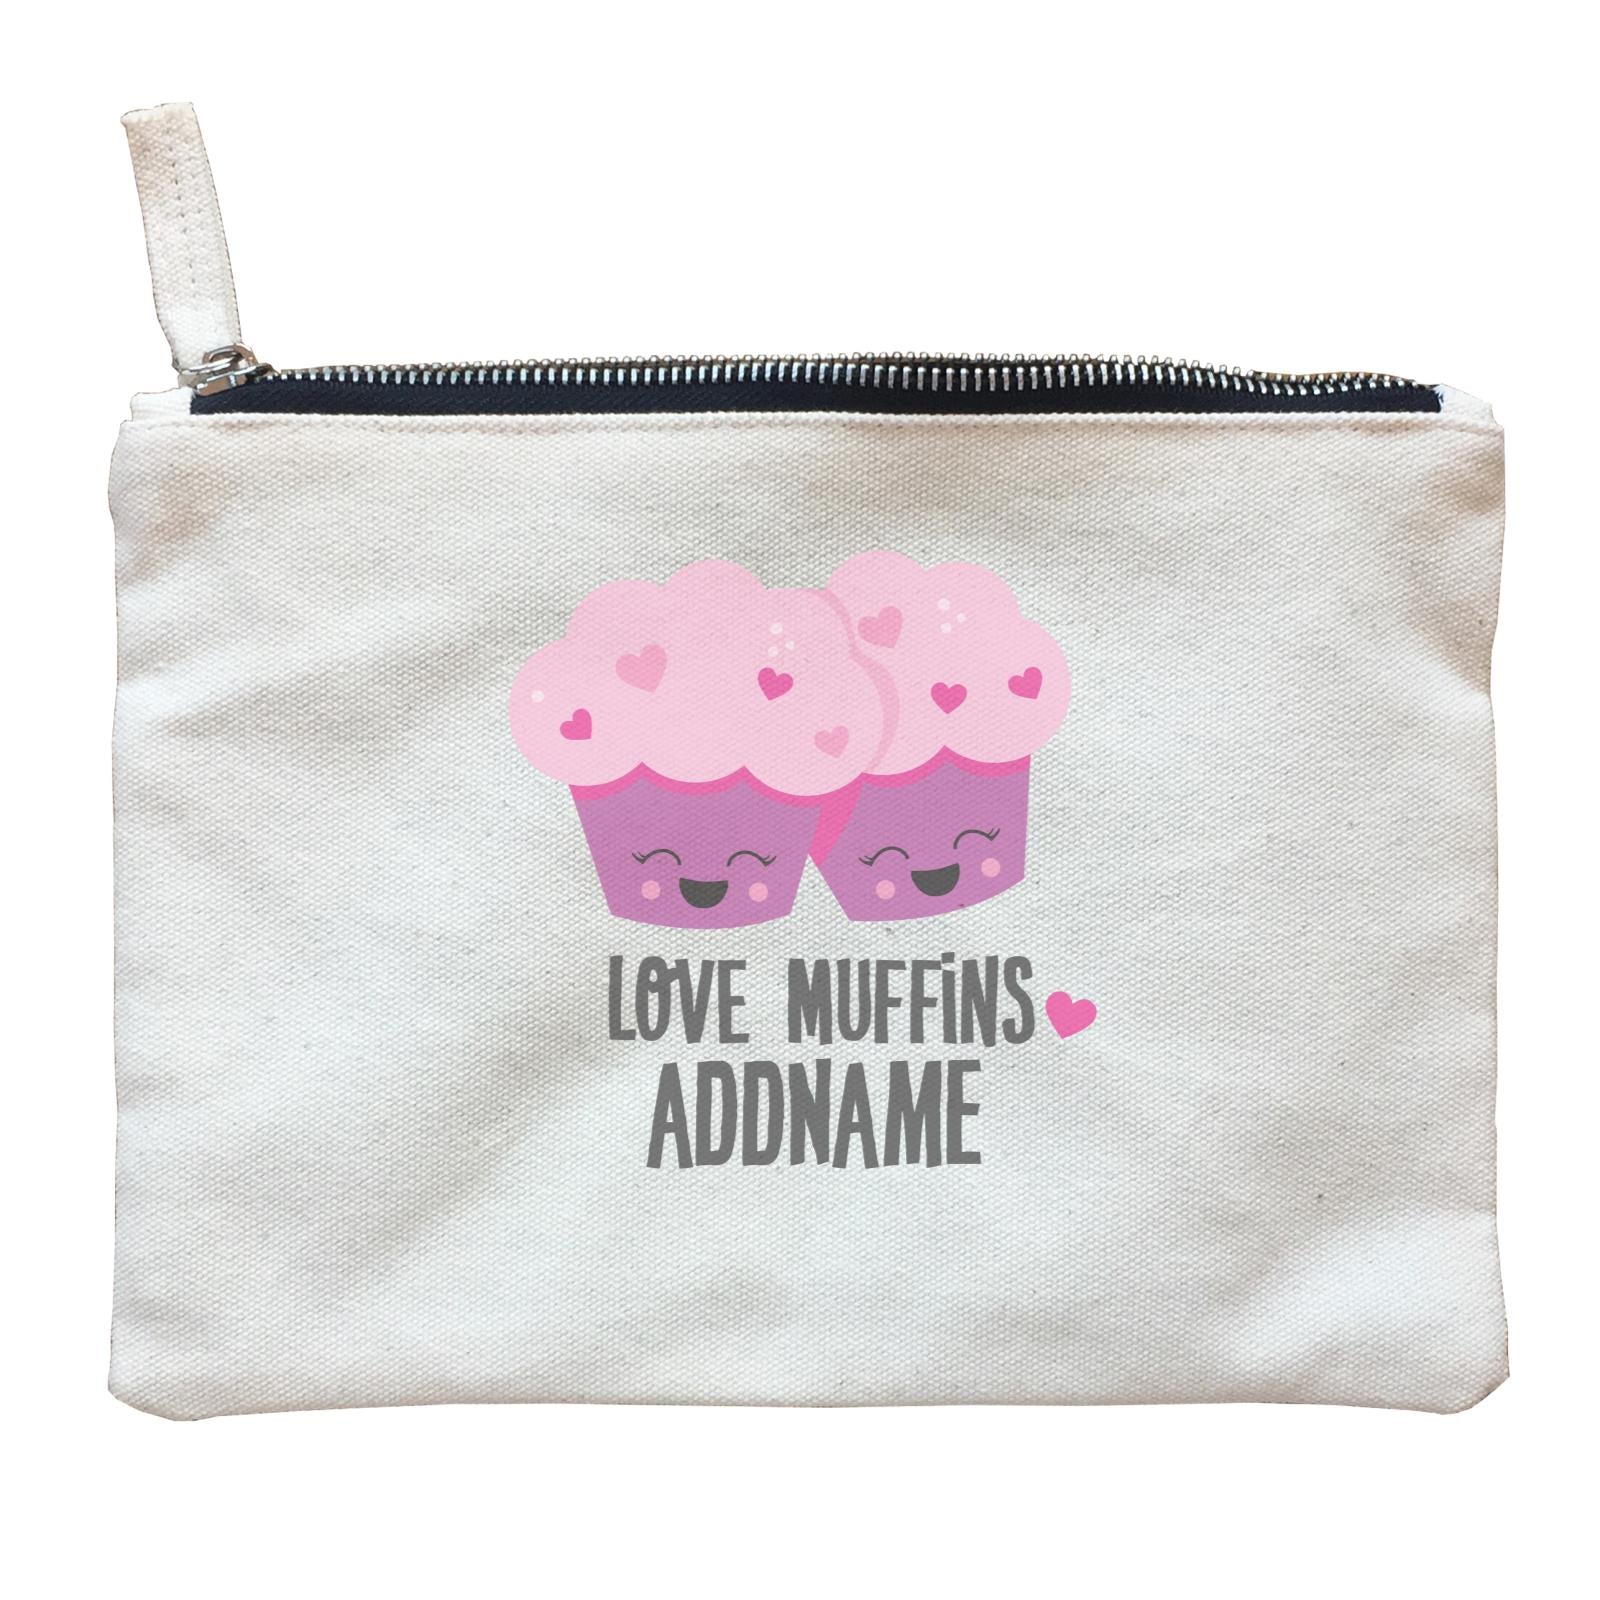 Love Food Puns Love Muffins Addname Zipper Pouch